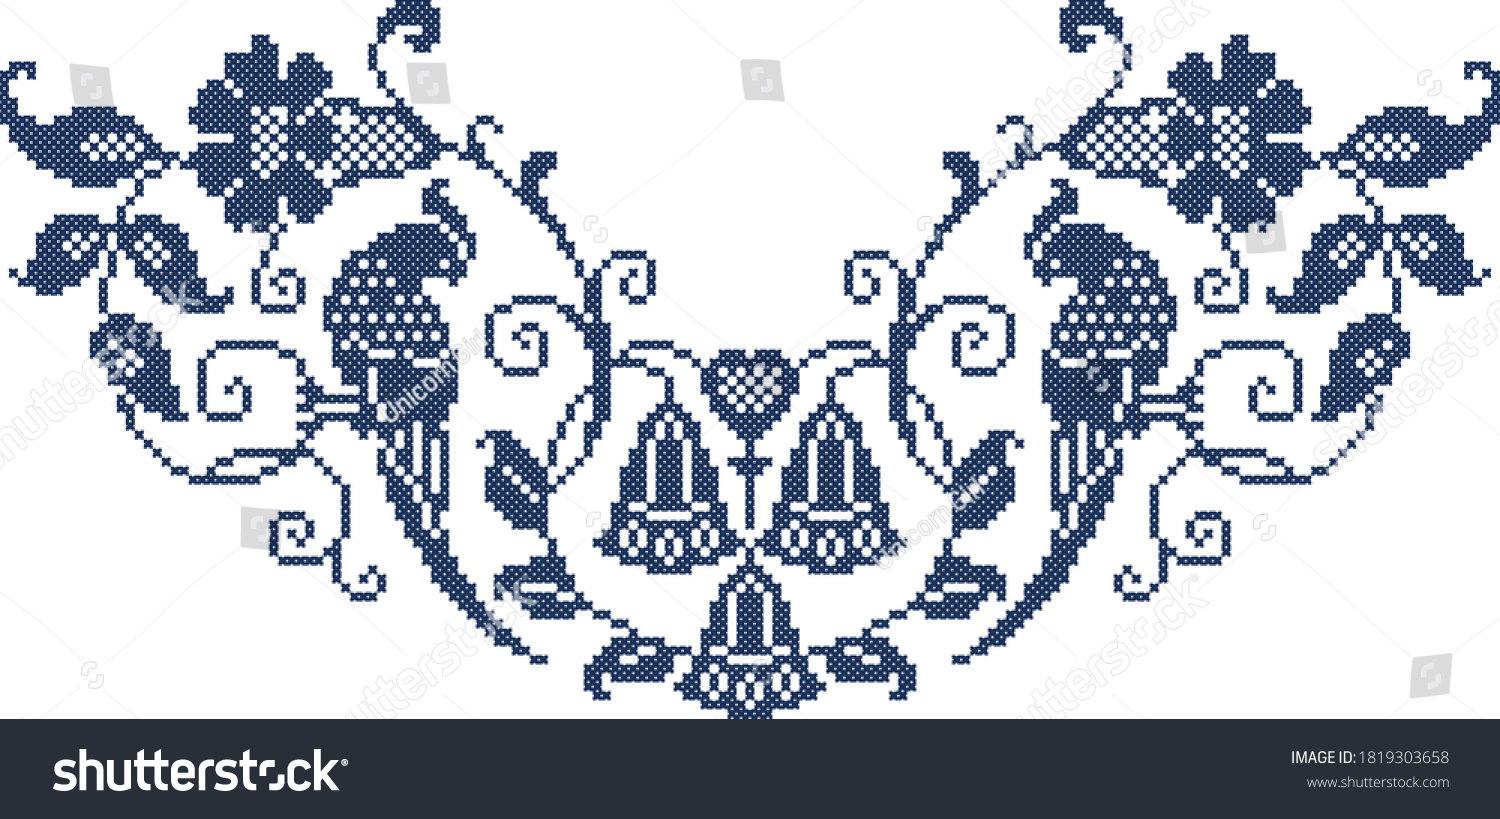 SVG of 
The scheme for cross-stitch flowers with leaves on which sit the birds in blue svg